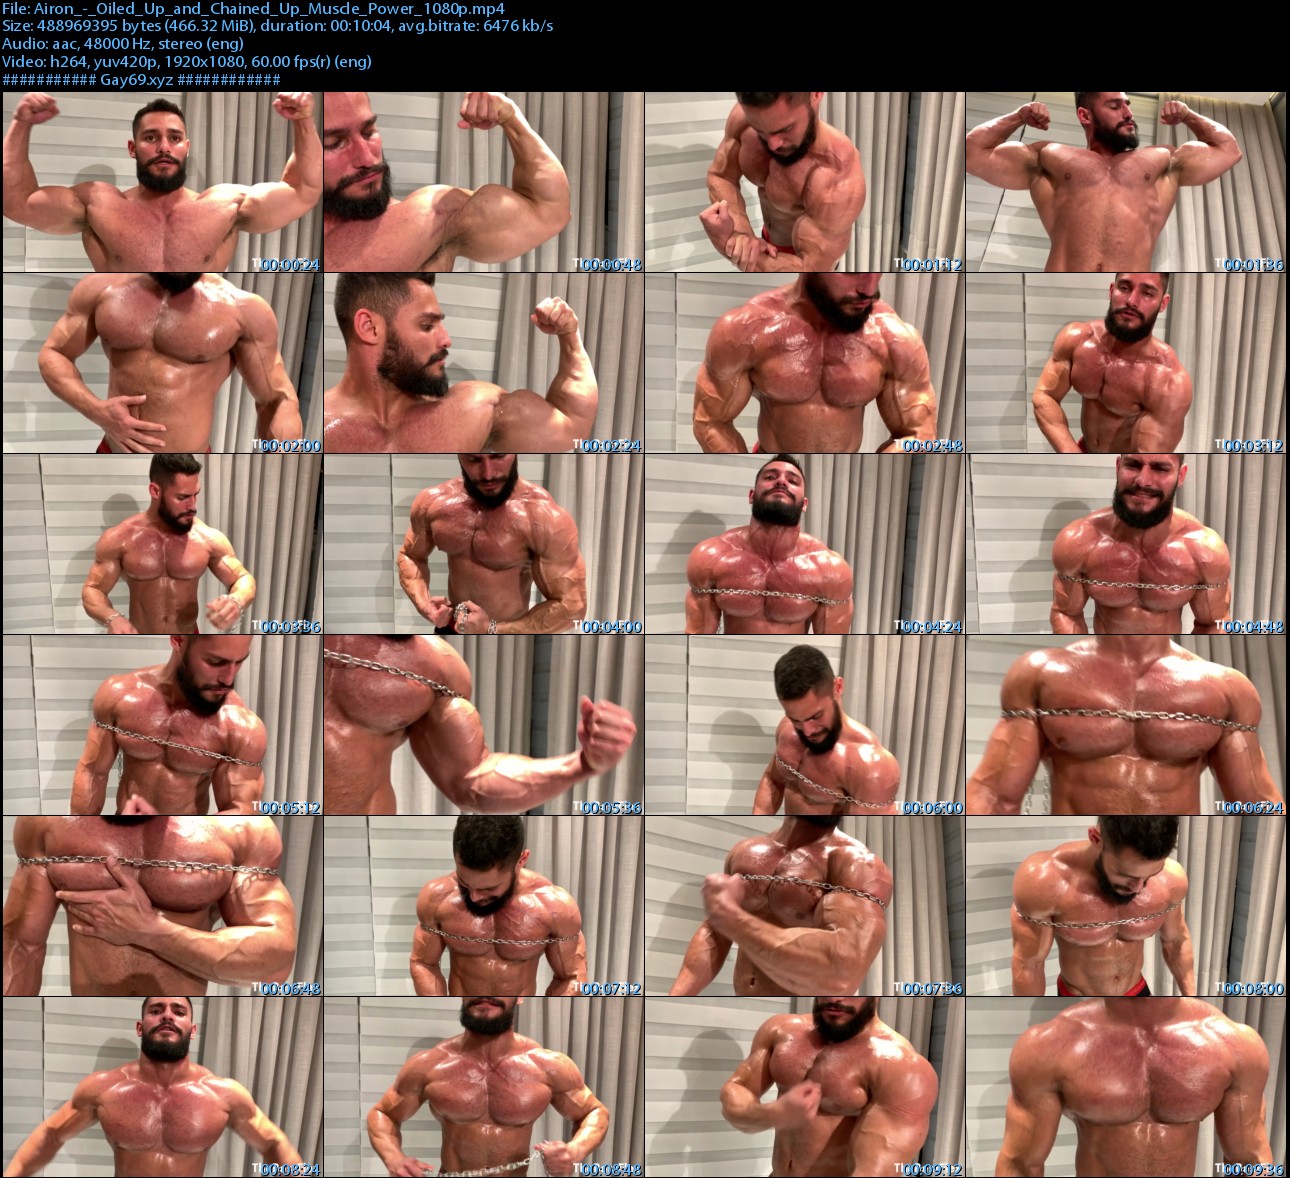 Airon_-_Oiled_Up_and_Chained_Up_Muscle_Power_1080p_s.jpg